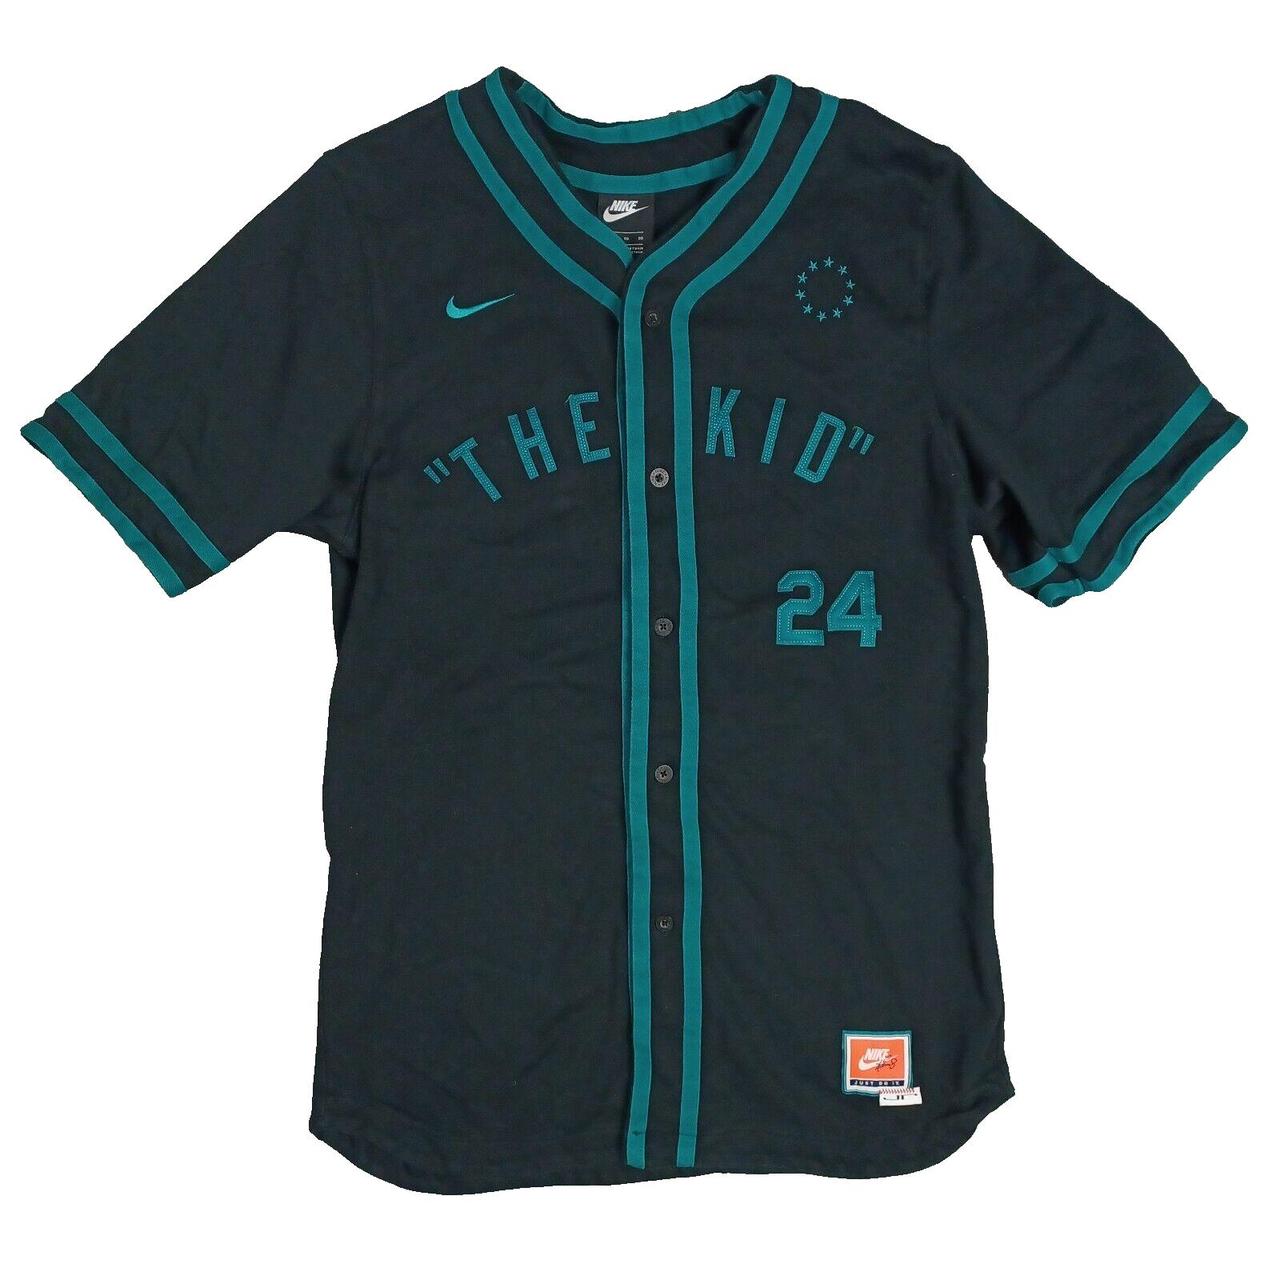 Adult XL Other Jersey